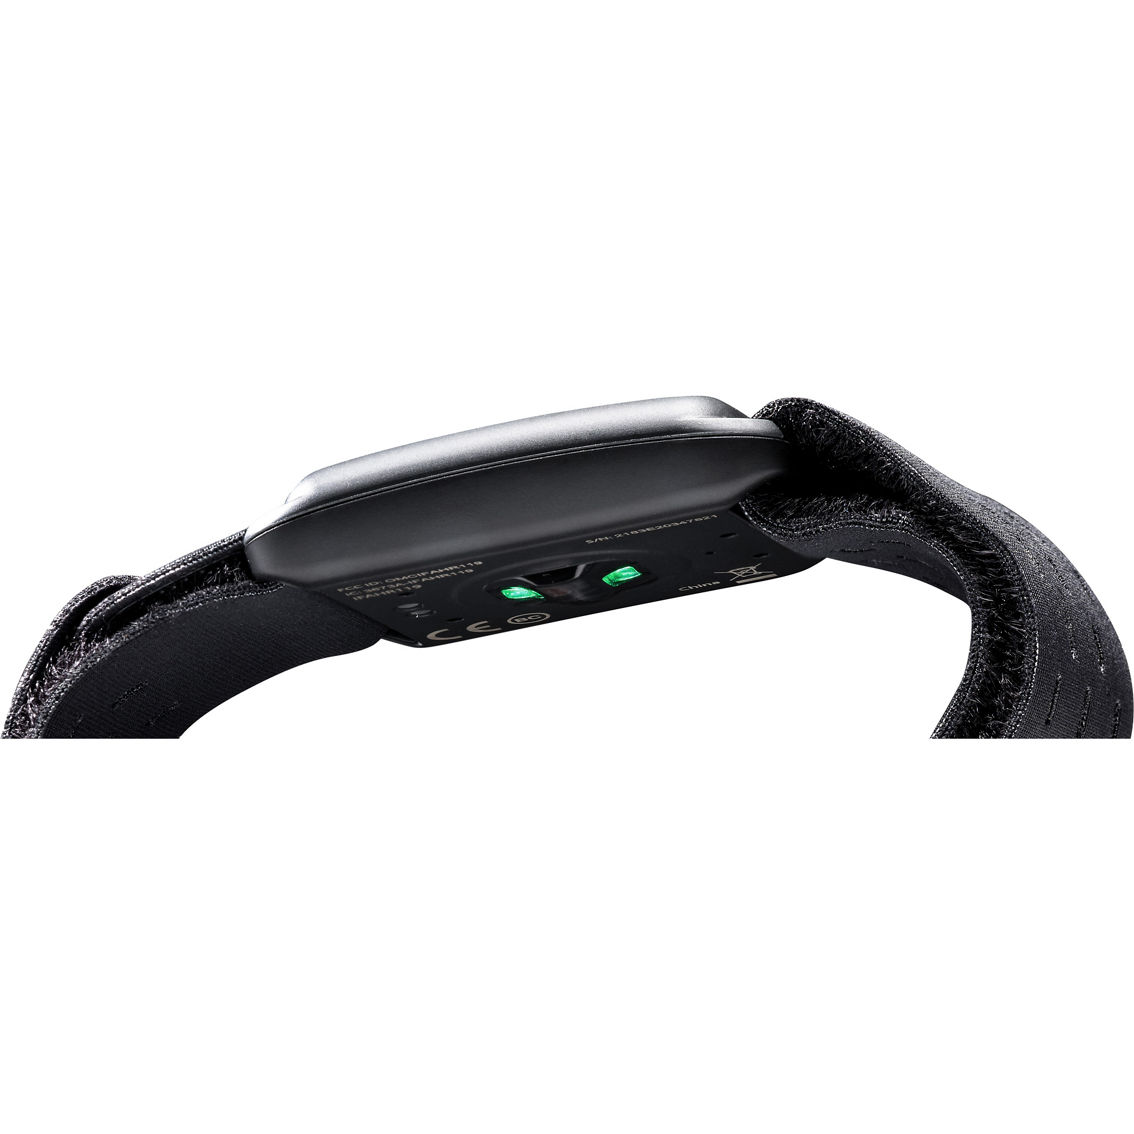 NordicTrack iFit Heart Rate (HR) Monitor - Image 5 of 6